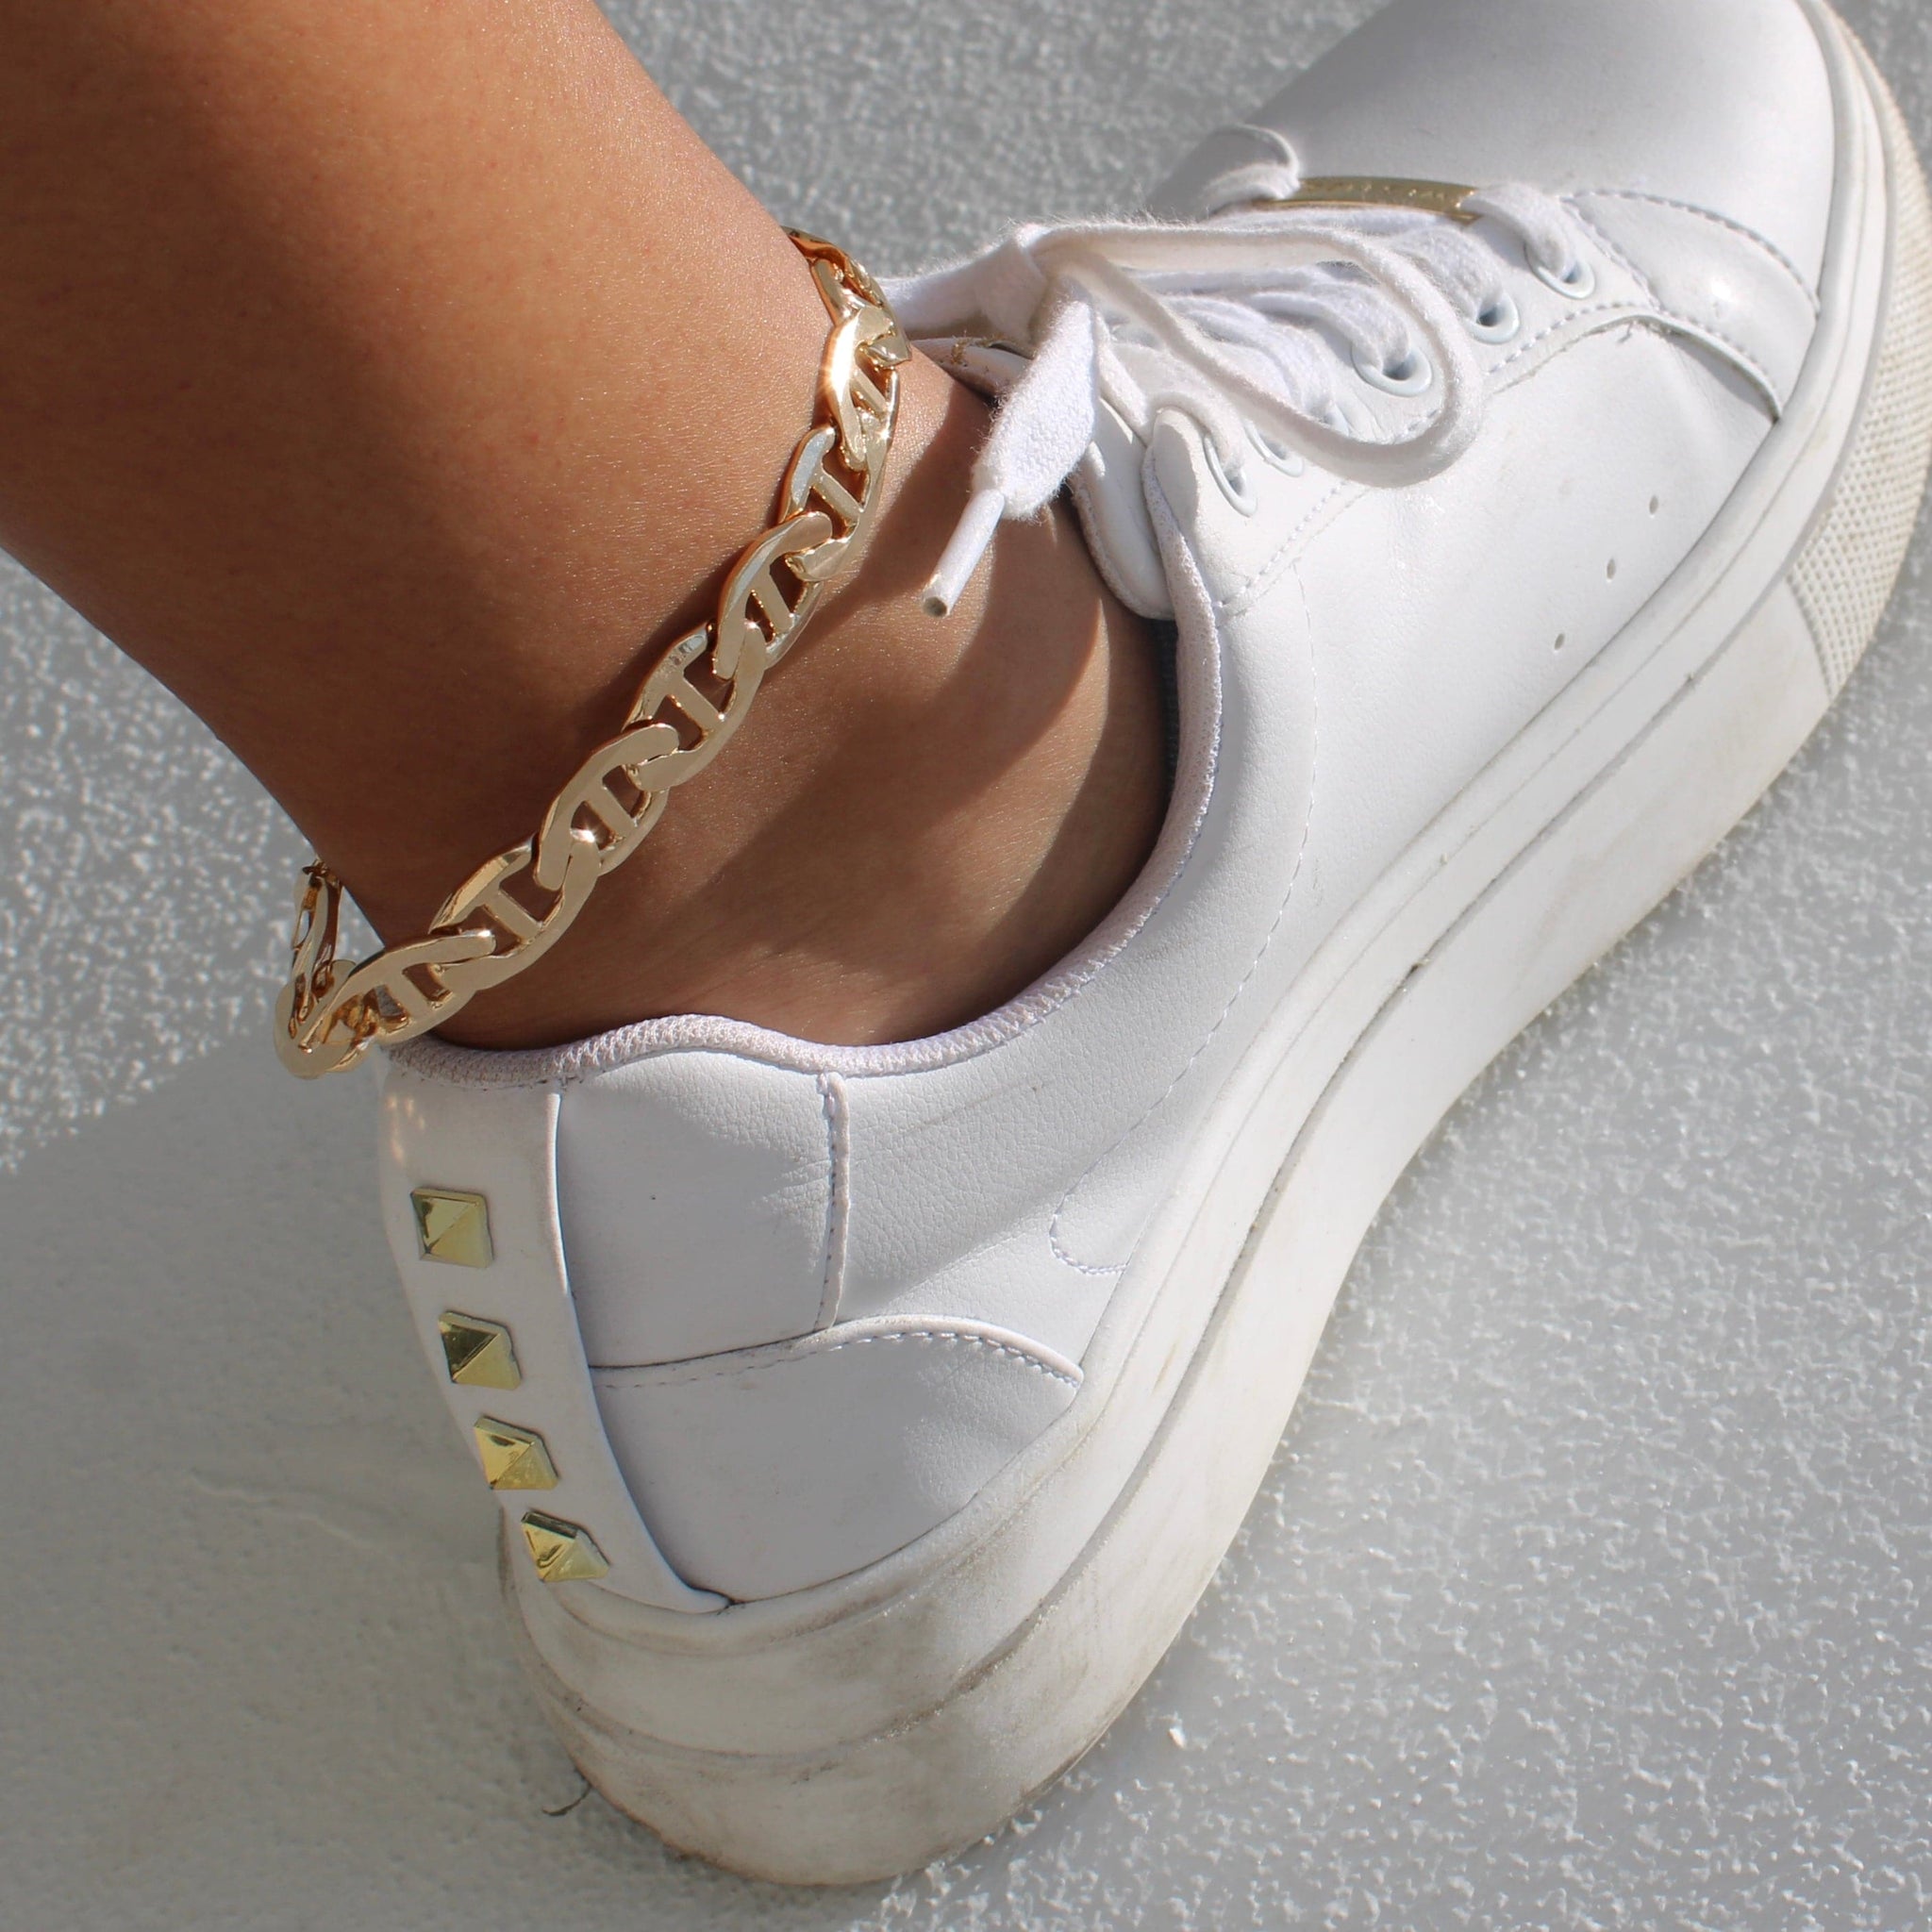 Yacht Party Anklet